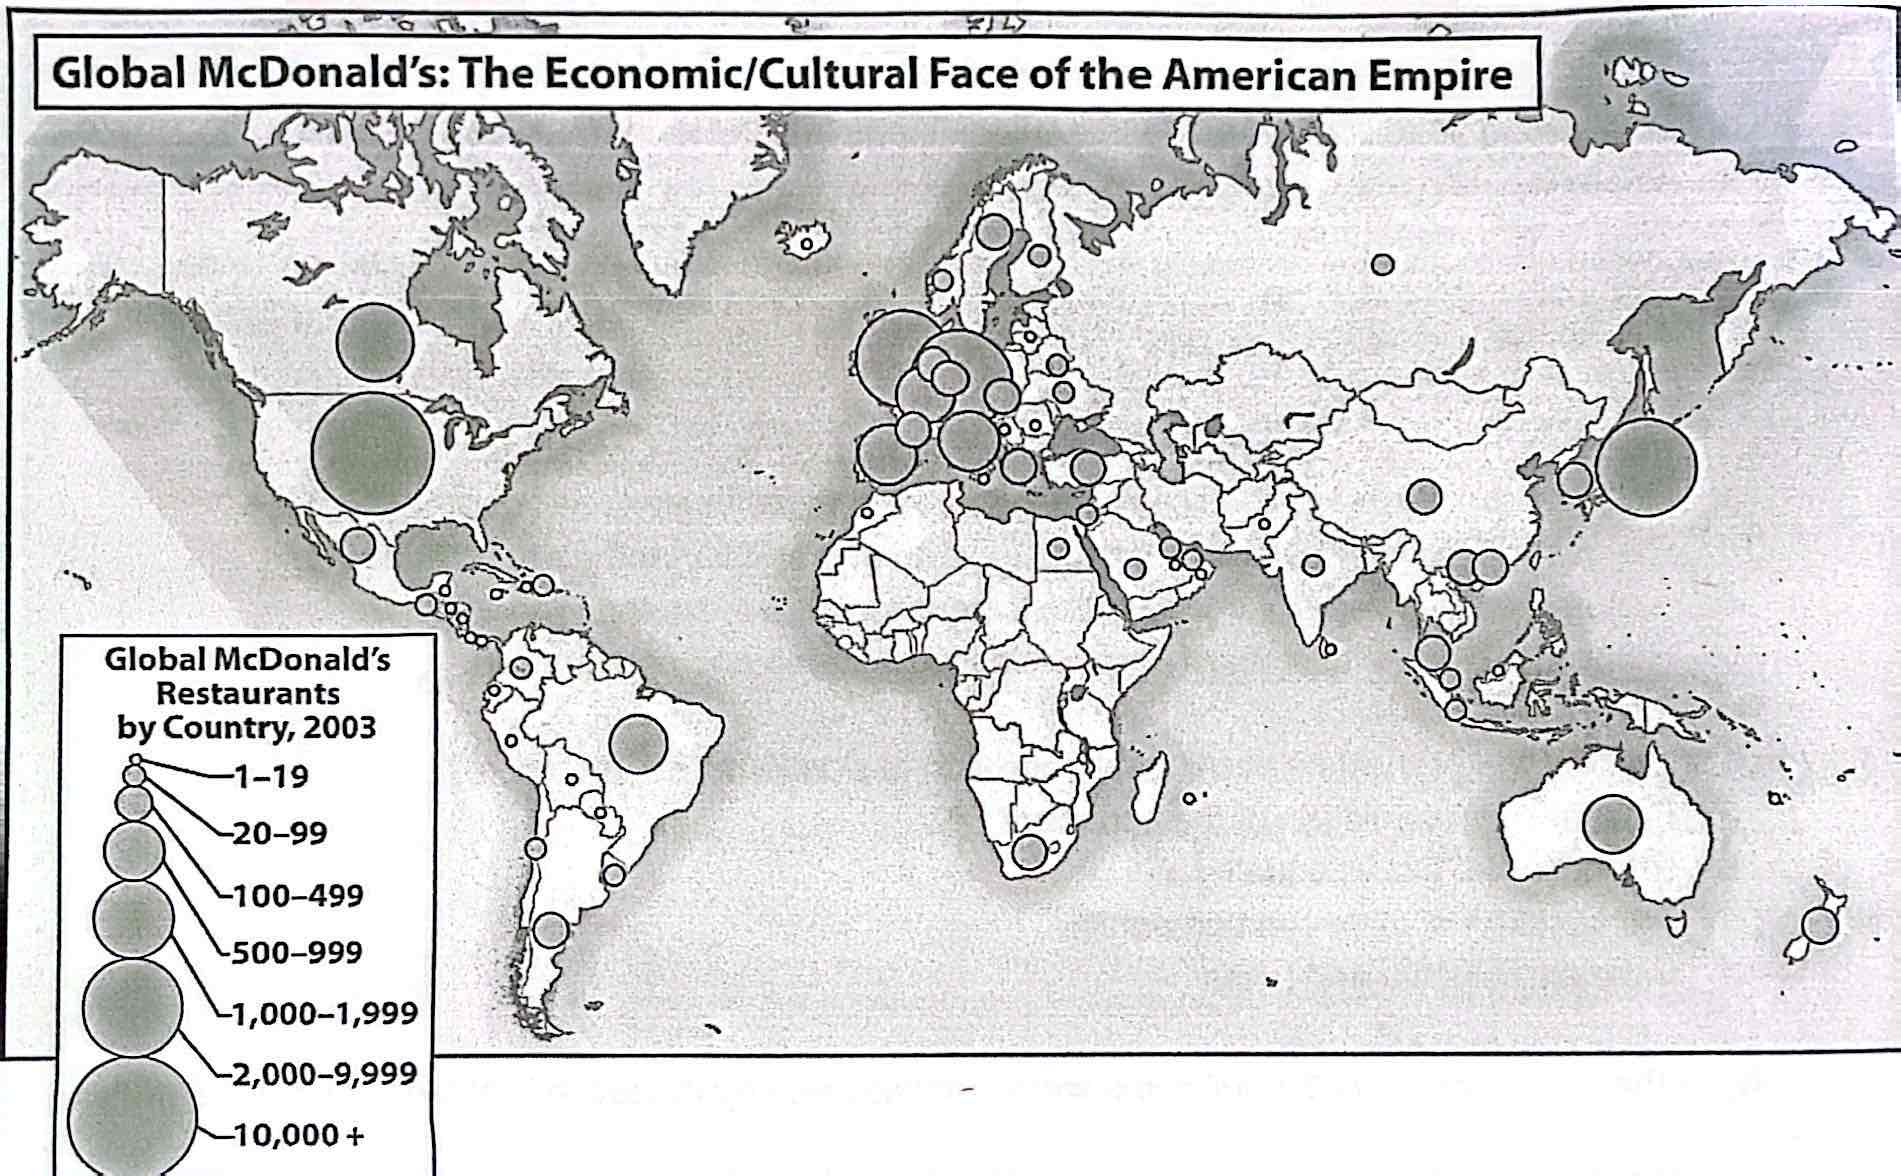 <p><strong>15-7. </strong>The map showing the global distribution of McDonald's highlights which aspect of the so-called American empire?<br><br>a) Counterculture<br>b) Soft power<br>c) Cultural revolution<br>d) Grassroots democracy</p>